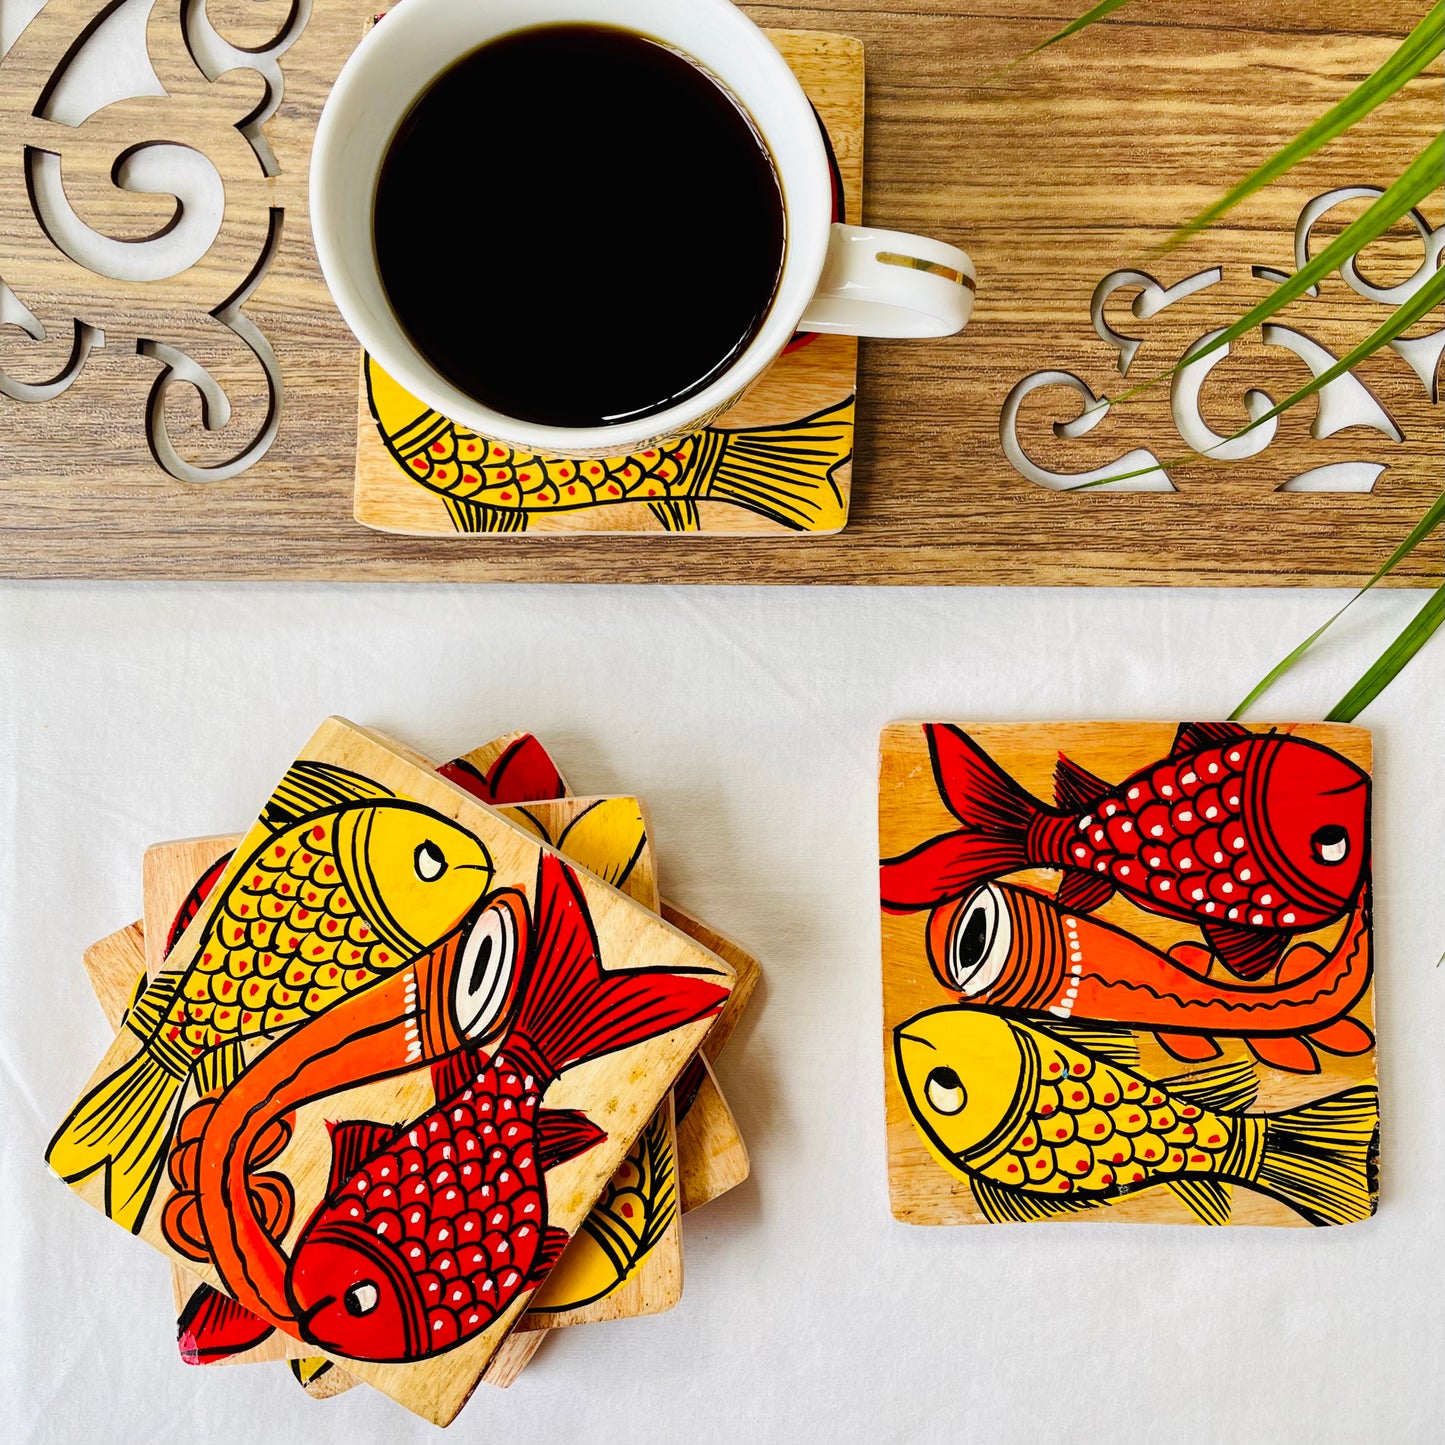 Alokya - 100% natural, Pattachitra painted terracotta coasters  - Square coasters: fish painted on the surface.